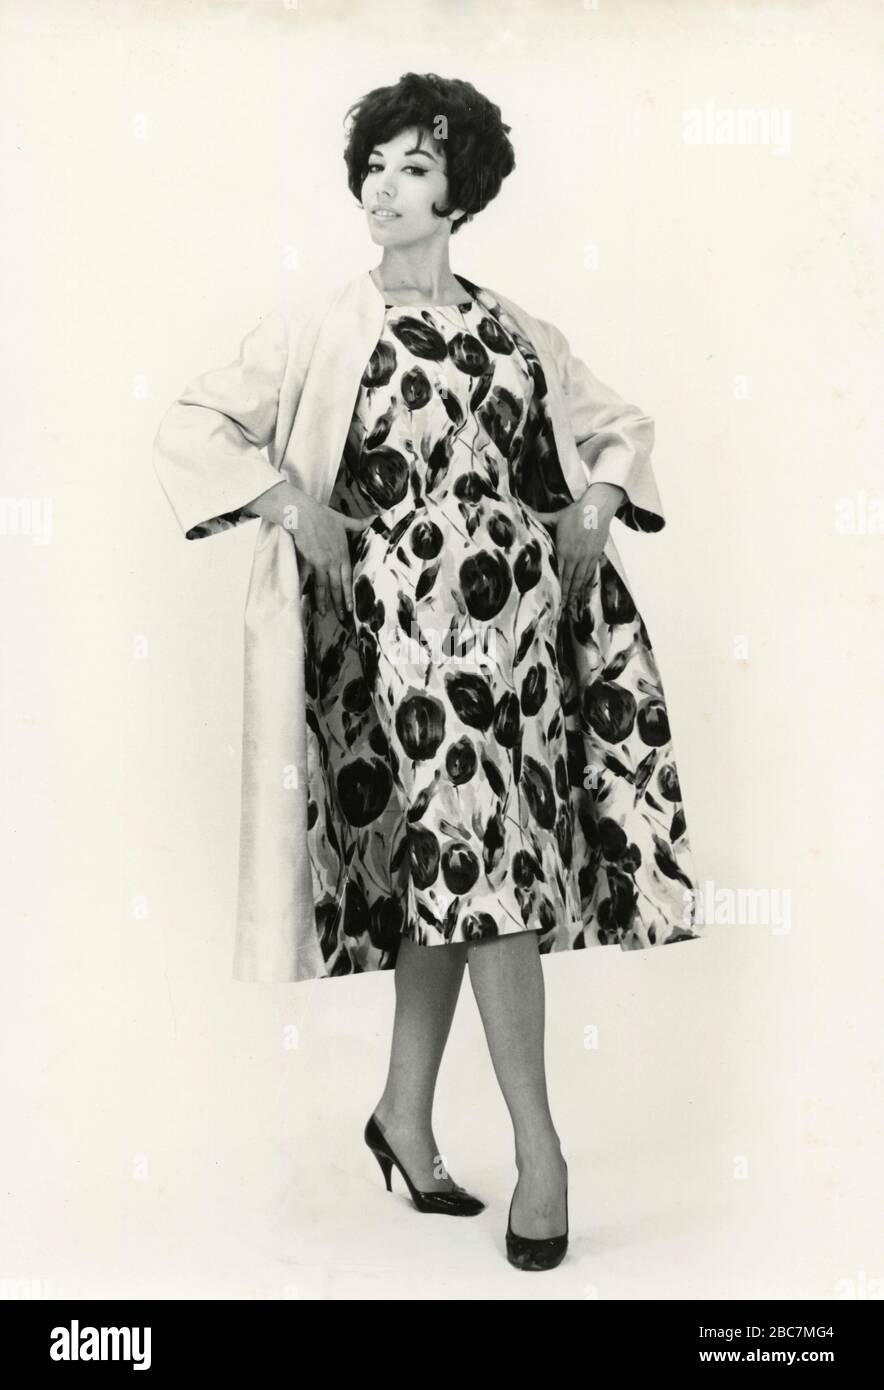 Model from the 1960s presenting an outfit with floral dress and matching coat, Italy Stock Photo